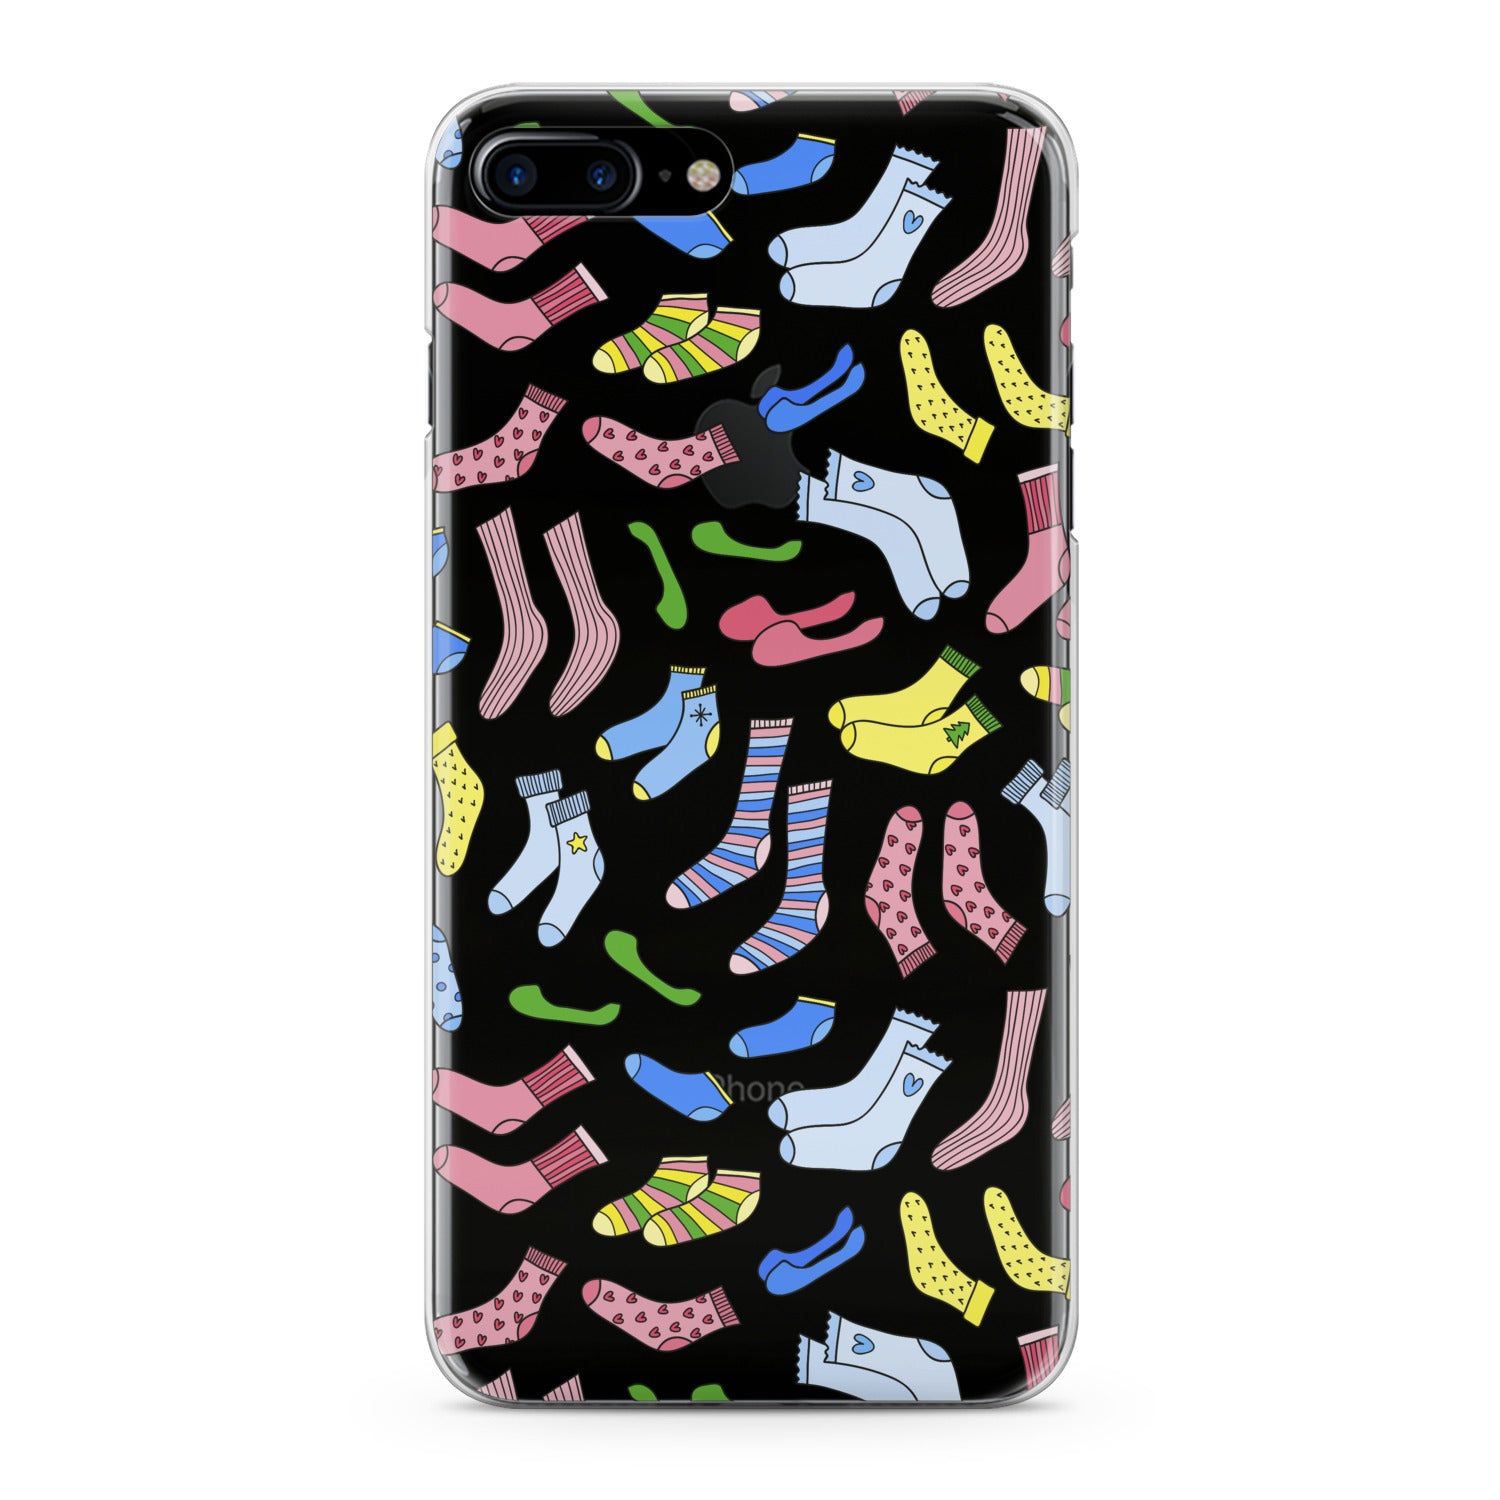 Lex Altern Colored Socks Pattern Phone Case for your iPhone & Android phone.